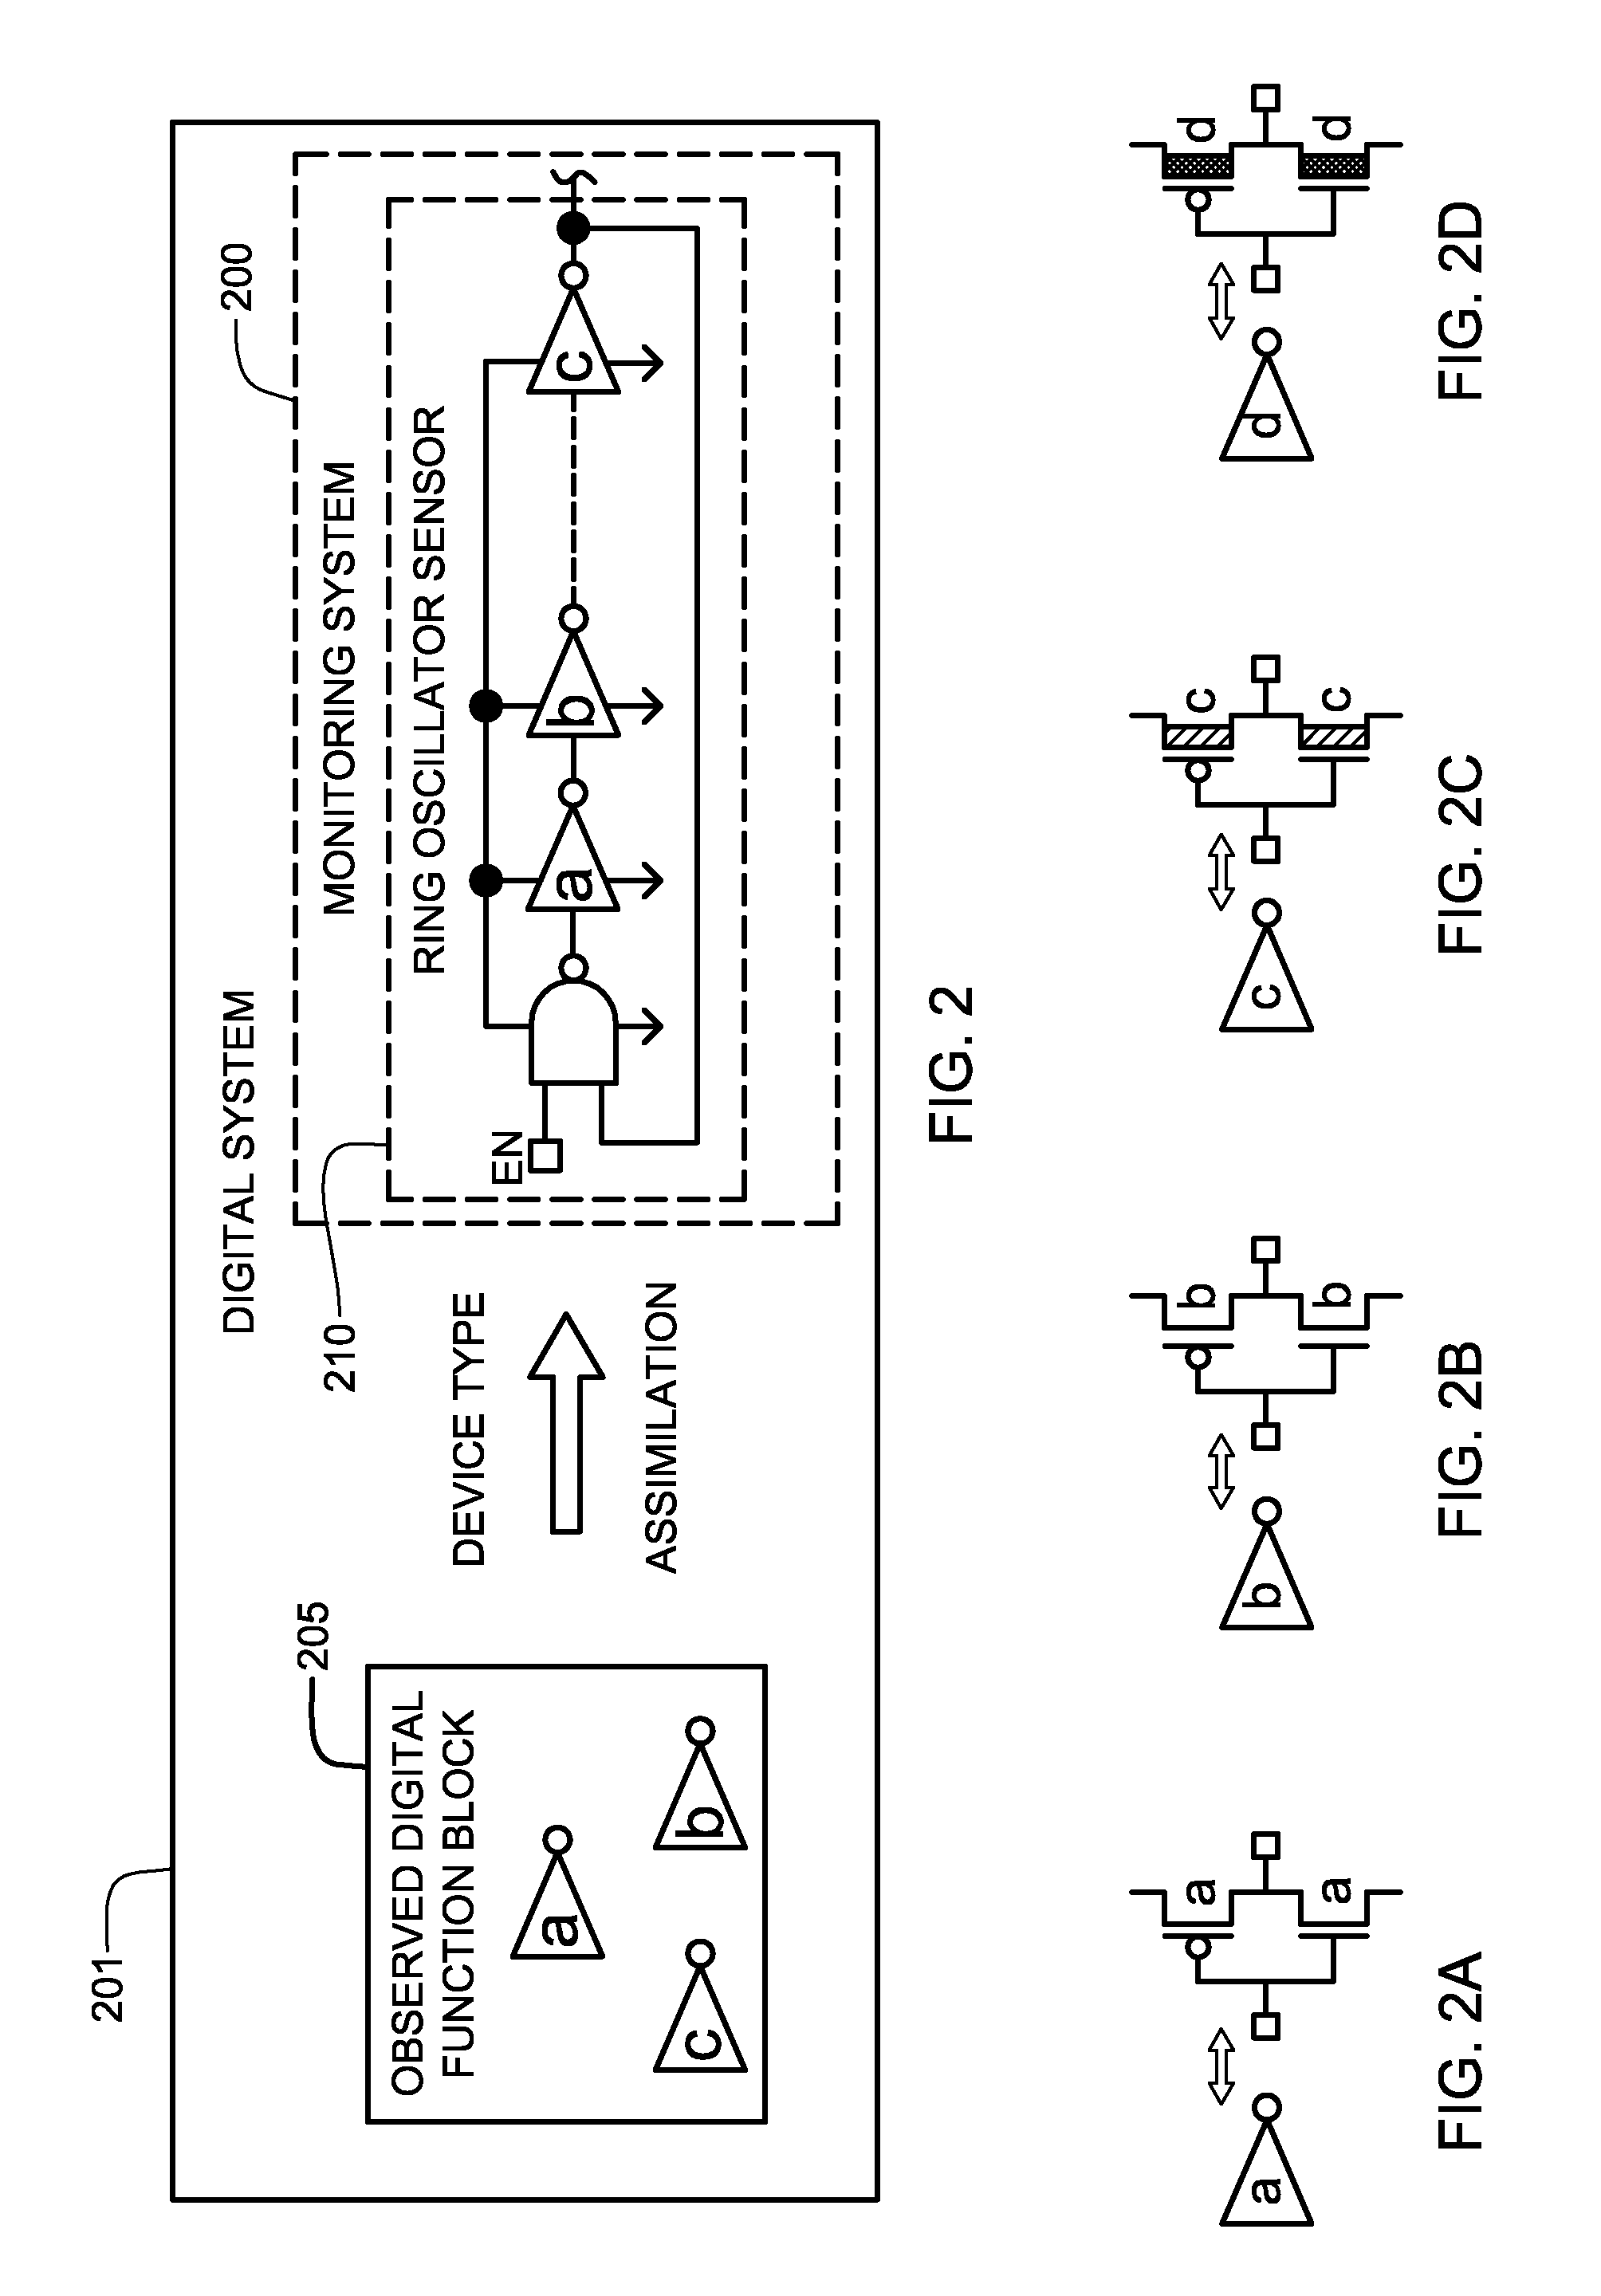 System and method for monitoring reliability of a digital system